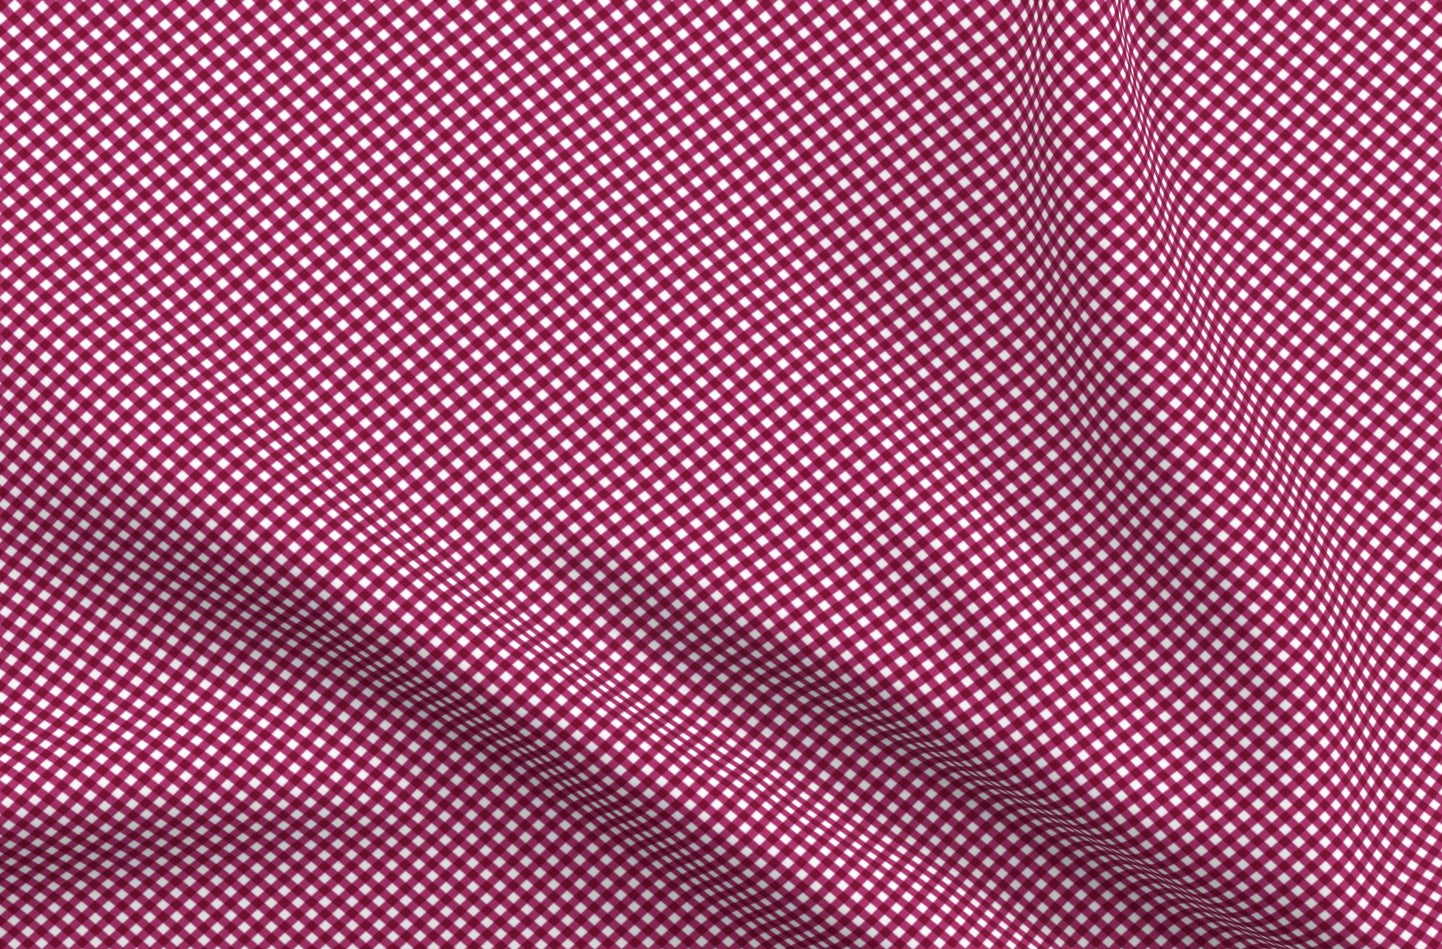 Gingham Style Bubble Gum Small Bias Printed Fabric by Studio Ten Design